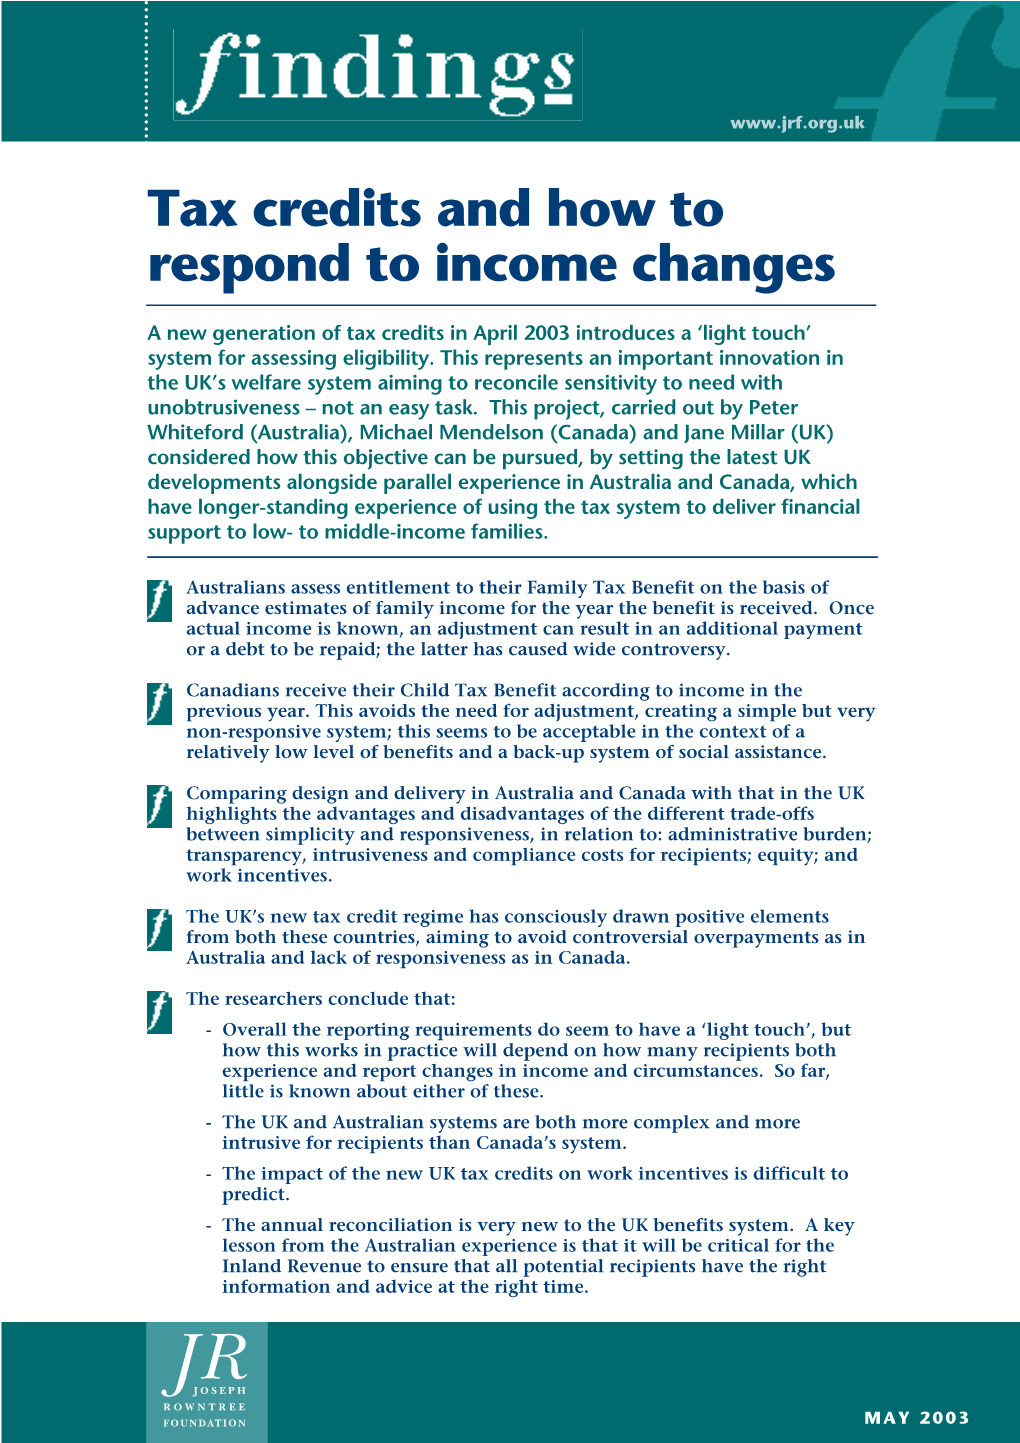 Tax Credits and How to Respond to Income Changes